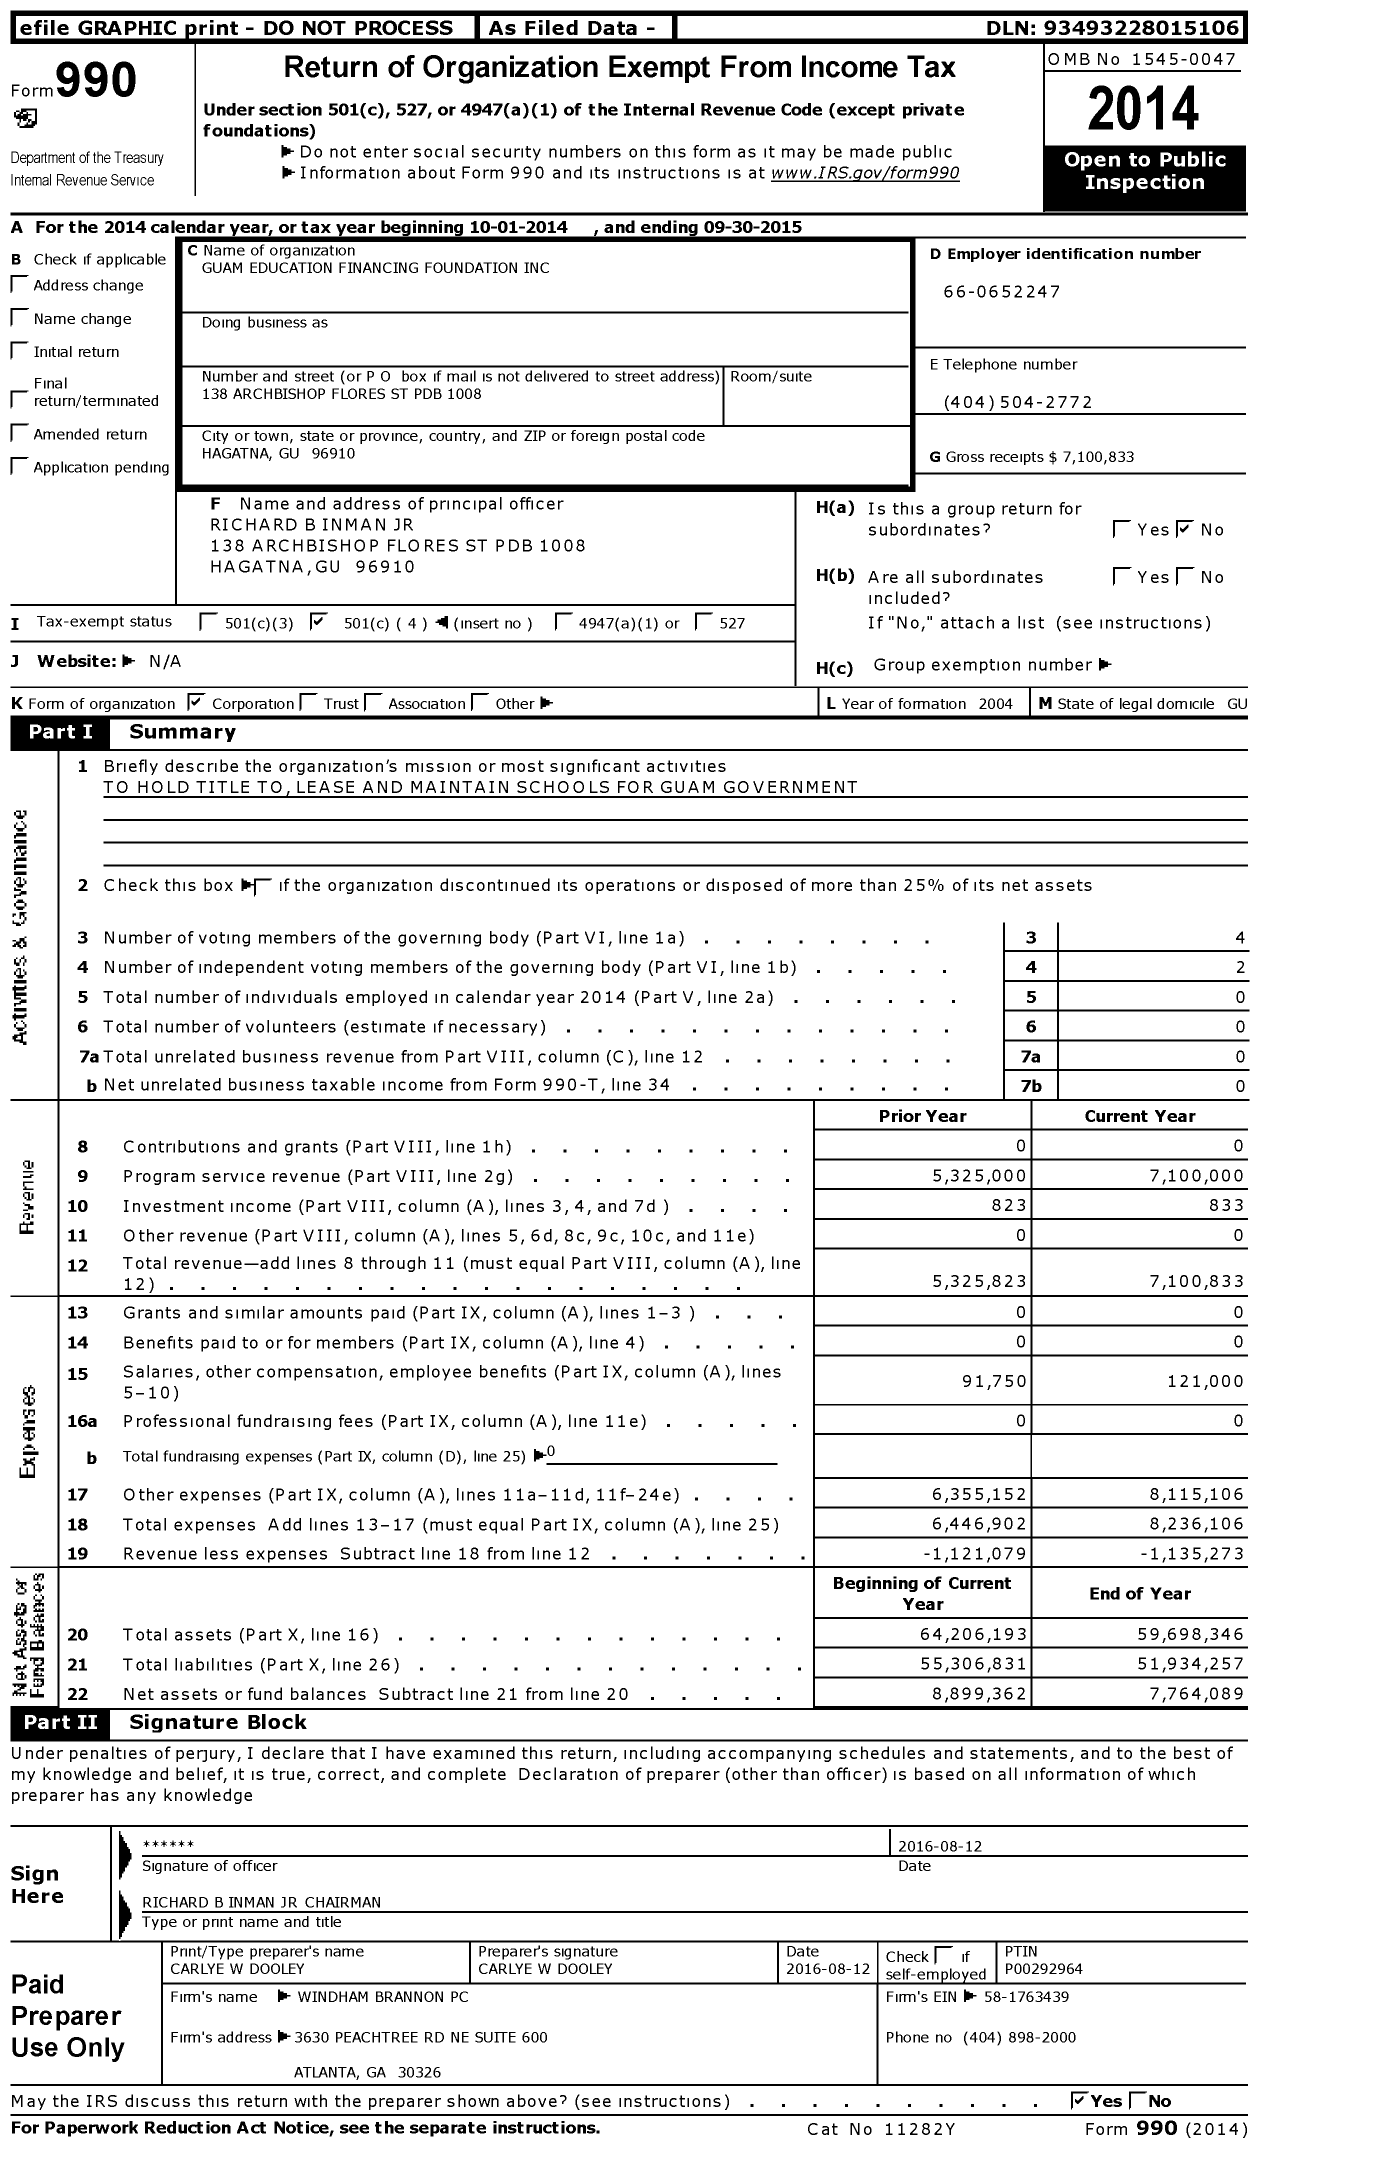 Image of first page of 2014 Form 990O for Guam Education Financing Foundation